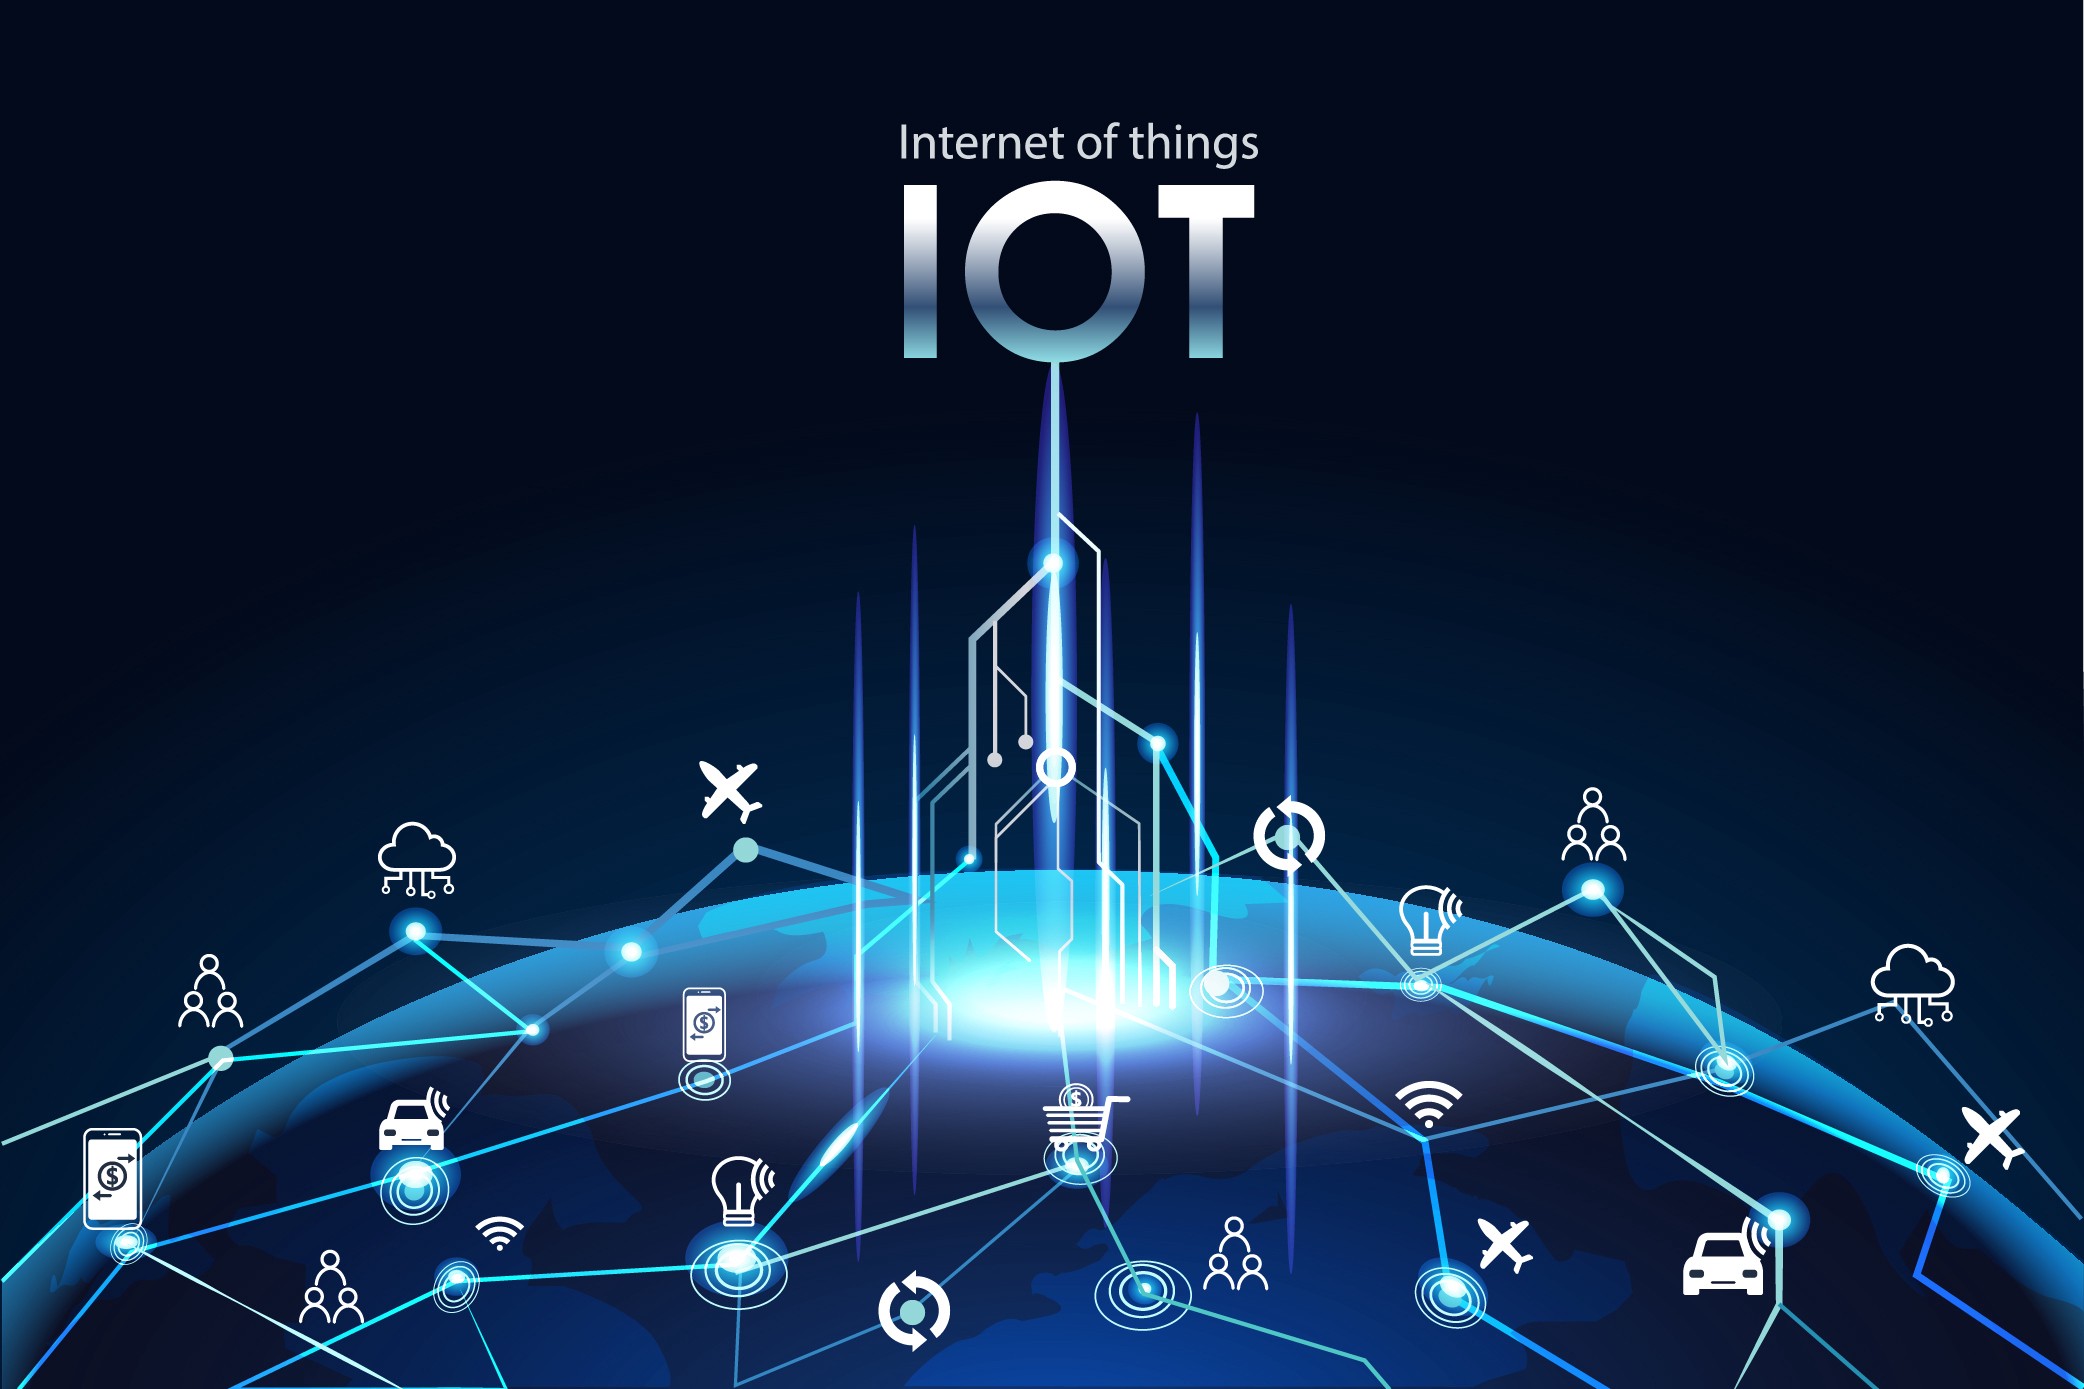 presentation on iot devices